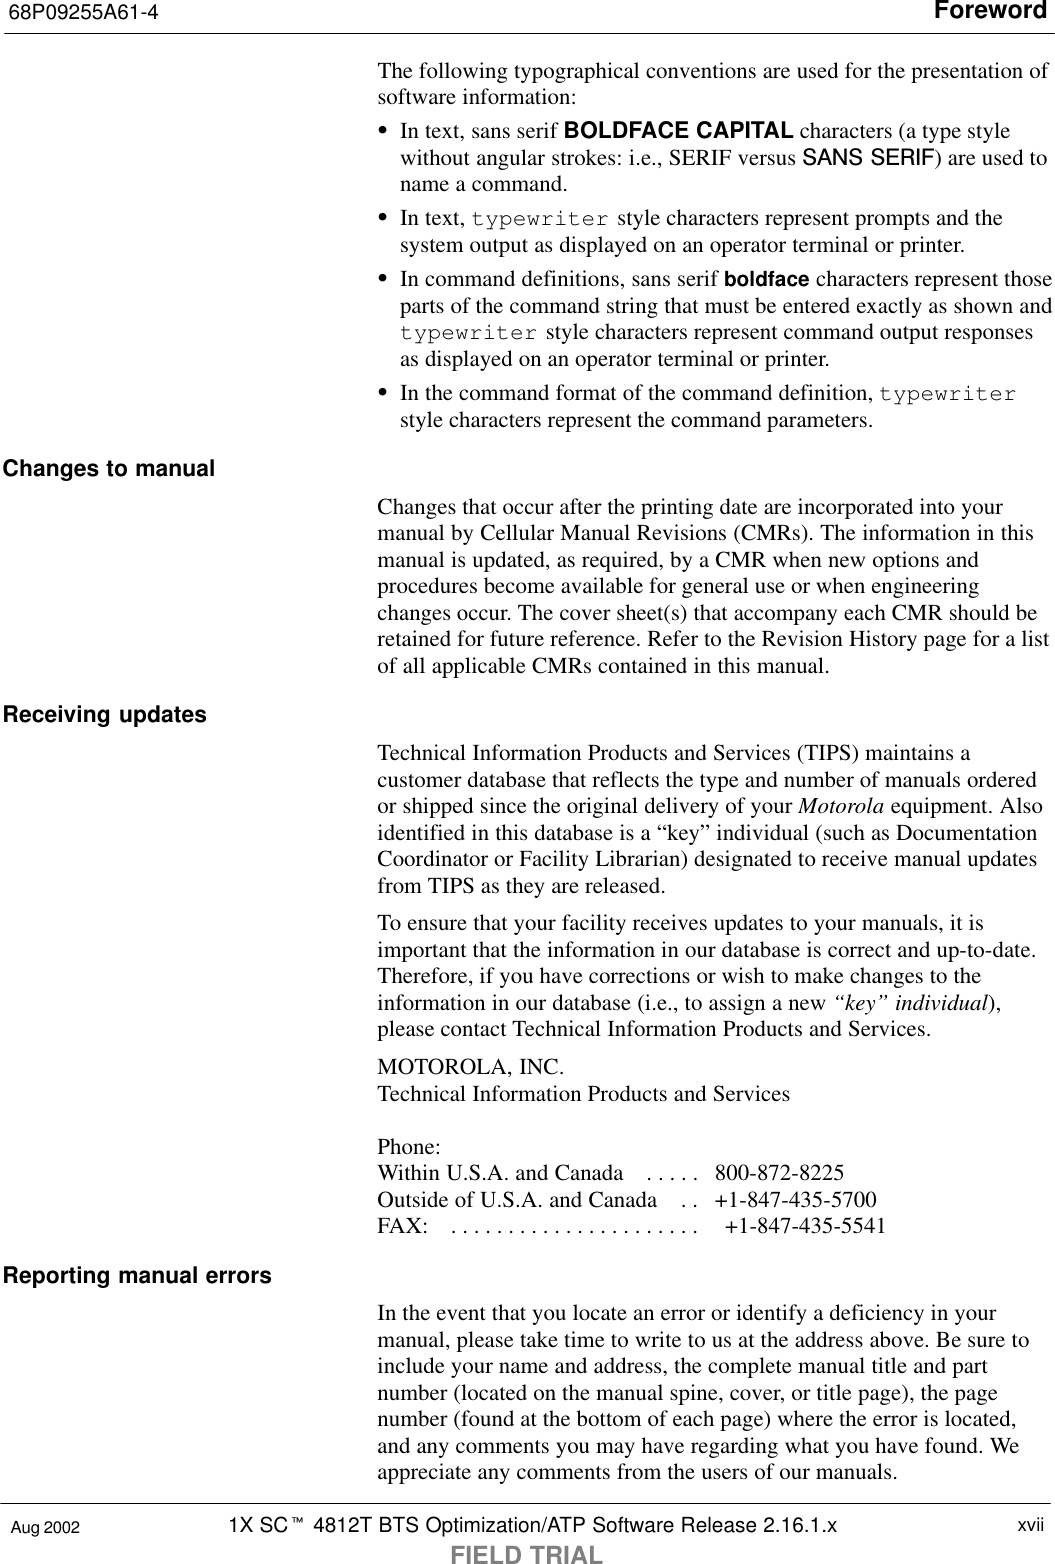 Foreword68P09255A61-41X SCt 4812T BTS Optimization/ATP Software Release 2.16.1.xFIELD TRIALxviiAug 2002The following typographical conventions are used for the presentation ofsoftware information:SIn text, sans serif BOLDFACE CAPITAL characters (a type stylewithout angular strokes: i.e., SERIF versus SANS SERIF) are used toname a command.SIn text, typewriter style characters represent prompts and thesystem output as displayed on an operator terminal or printer.SIn command definitions, sans serif boldface characters represent thoseparts of the command string that must be entered exactly as shown andtypewriter style characters represent command output responsesas displayed on an operator terminal or printer.SIn the command format of the command definition, typewriterstyle characters represent the command parameters.Changes to manualChanges that occur after the printing date are incorporated into yourmanual by Cellular Manual Revisions (CMRs). The information in thismanual is updated, as required, by a CMR when new options andprocedures become available for general use or when engineeringchanges occur. The cover sheet(s) that accompany each CMR should beretained for future reference. Refer to the Revision History page for a listof all applicable CMRs contained in this manual.Receiving updatesTechnical Information Products and Services (TIPS) maintains acustomer database that reflects the type and number of manuals orderedor shipped since the original delivery of your Motorola equipment. Alsoidentified in this database is a “key” individual (such as DocumentationCoordinator or Facility Librarian) designated to receive manual updatesfrom TIPS as they are released.To ensure that your facility receives updates to your manuals, it isimportant that the information in our database is correct and up-to-date.Therefore, if you have corrections or wish to make changes to theinformation in our database (i.e., to assign a new “key” individual),please contact Technical Information Products and Services.MOTOROLA, INC.Technical Information Products and ServicesPhone: Within U.S.A. and Canada   800-872-8225. . . . . Outside of U.S.A. and Canada   +1-847-435-5700. . FAX:     +1-847-435-5541. . . . . . . . . . . . . . . . . . . . . . Reporting manual errorsIn the event that you locate an error or identify a deficiency in yourmanual, please take time to write to us at the address above. Be sure toinclude your name and address, the complete manual title and partnumber (located on the manual spine, cover, or title page), the pagenumber (found at the bottom of each page) where the error is located,and any comments you may have regarding what you have found. Weappreciate any comments from the users of our manuals.